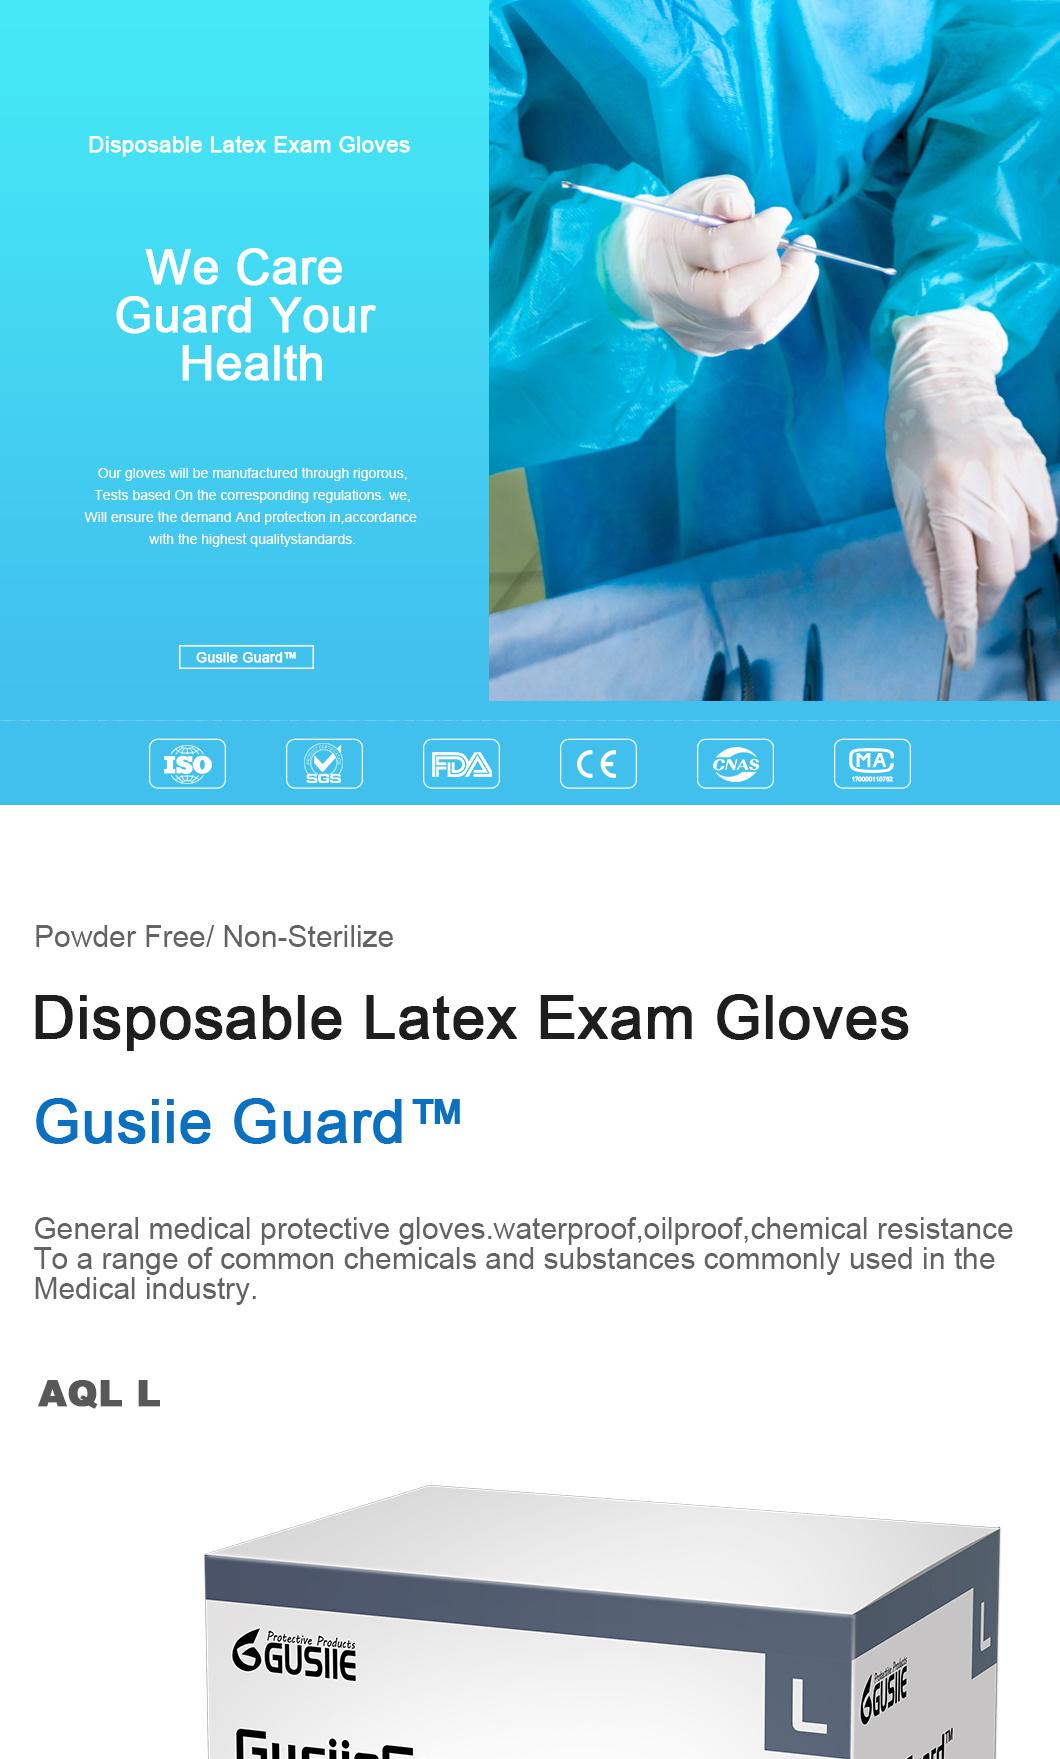 Powder Free Smooth or Surfaces Latex Medical Examination Gloves Are Disposable Rubber Gloves